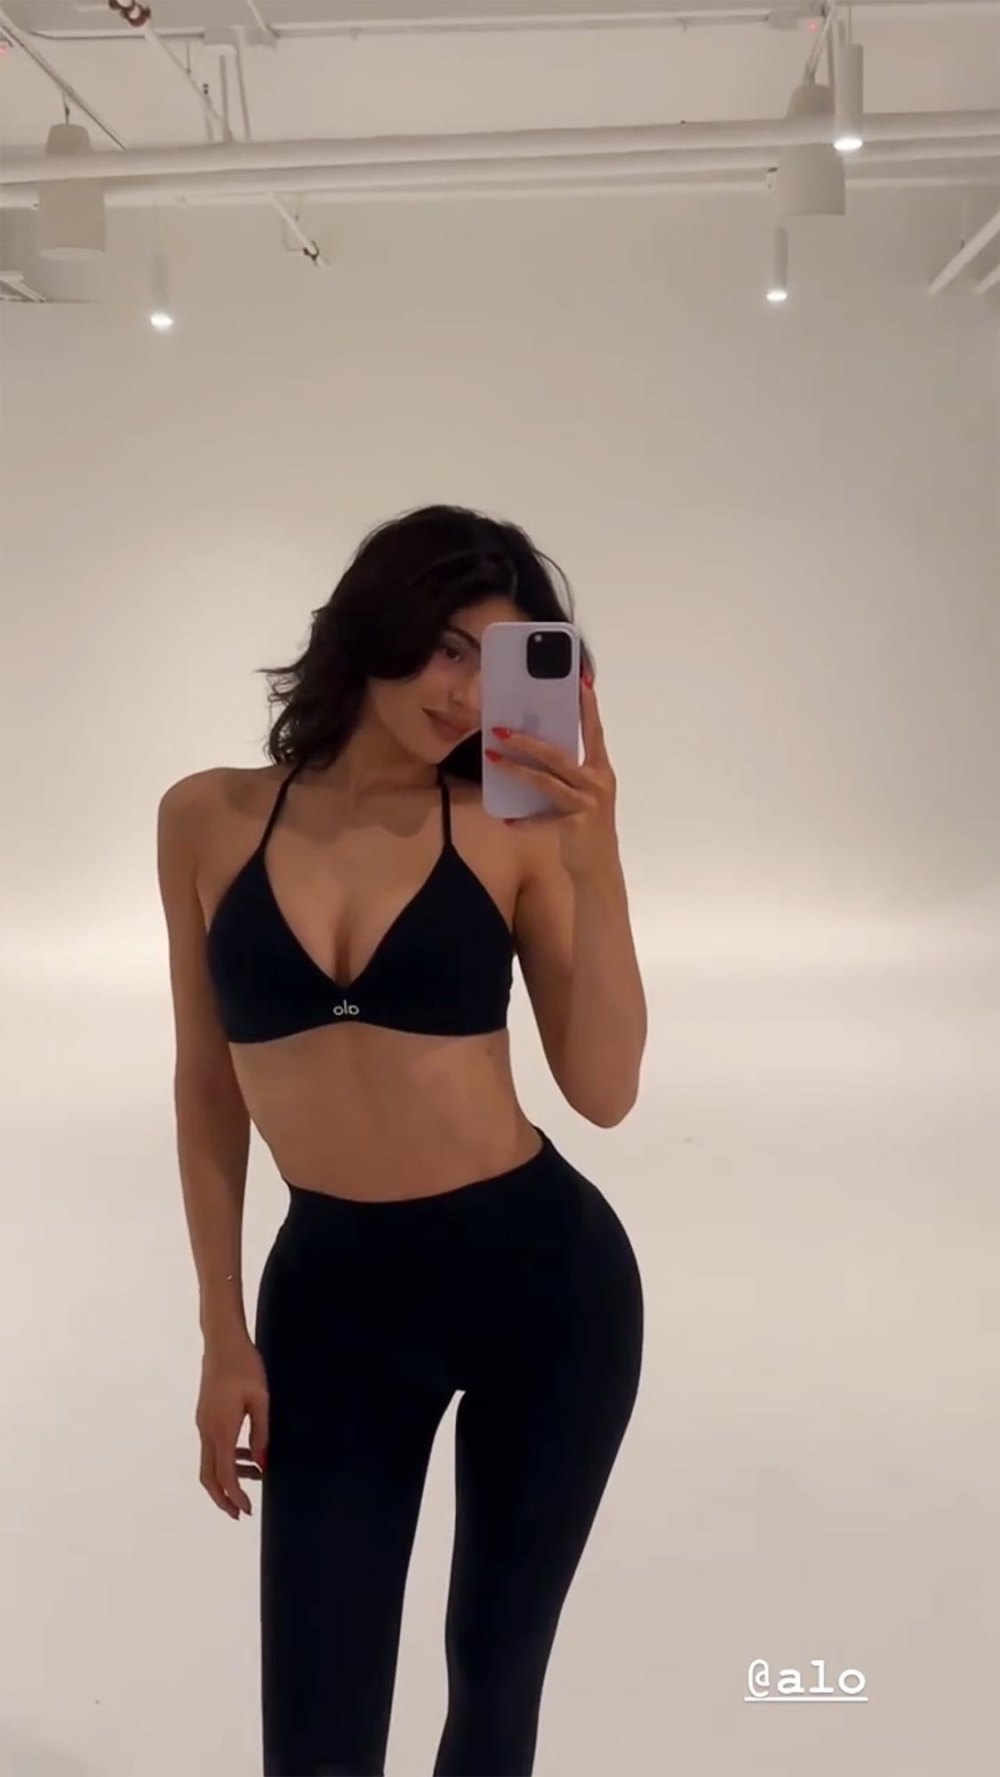 Kylie Jenner Shows Off Her Toned Figure in Sports Bra and Leggings 167